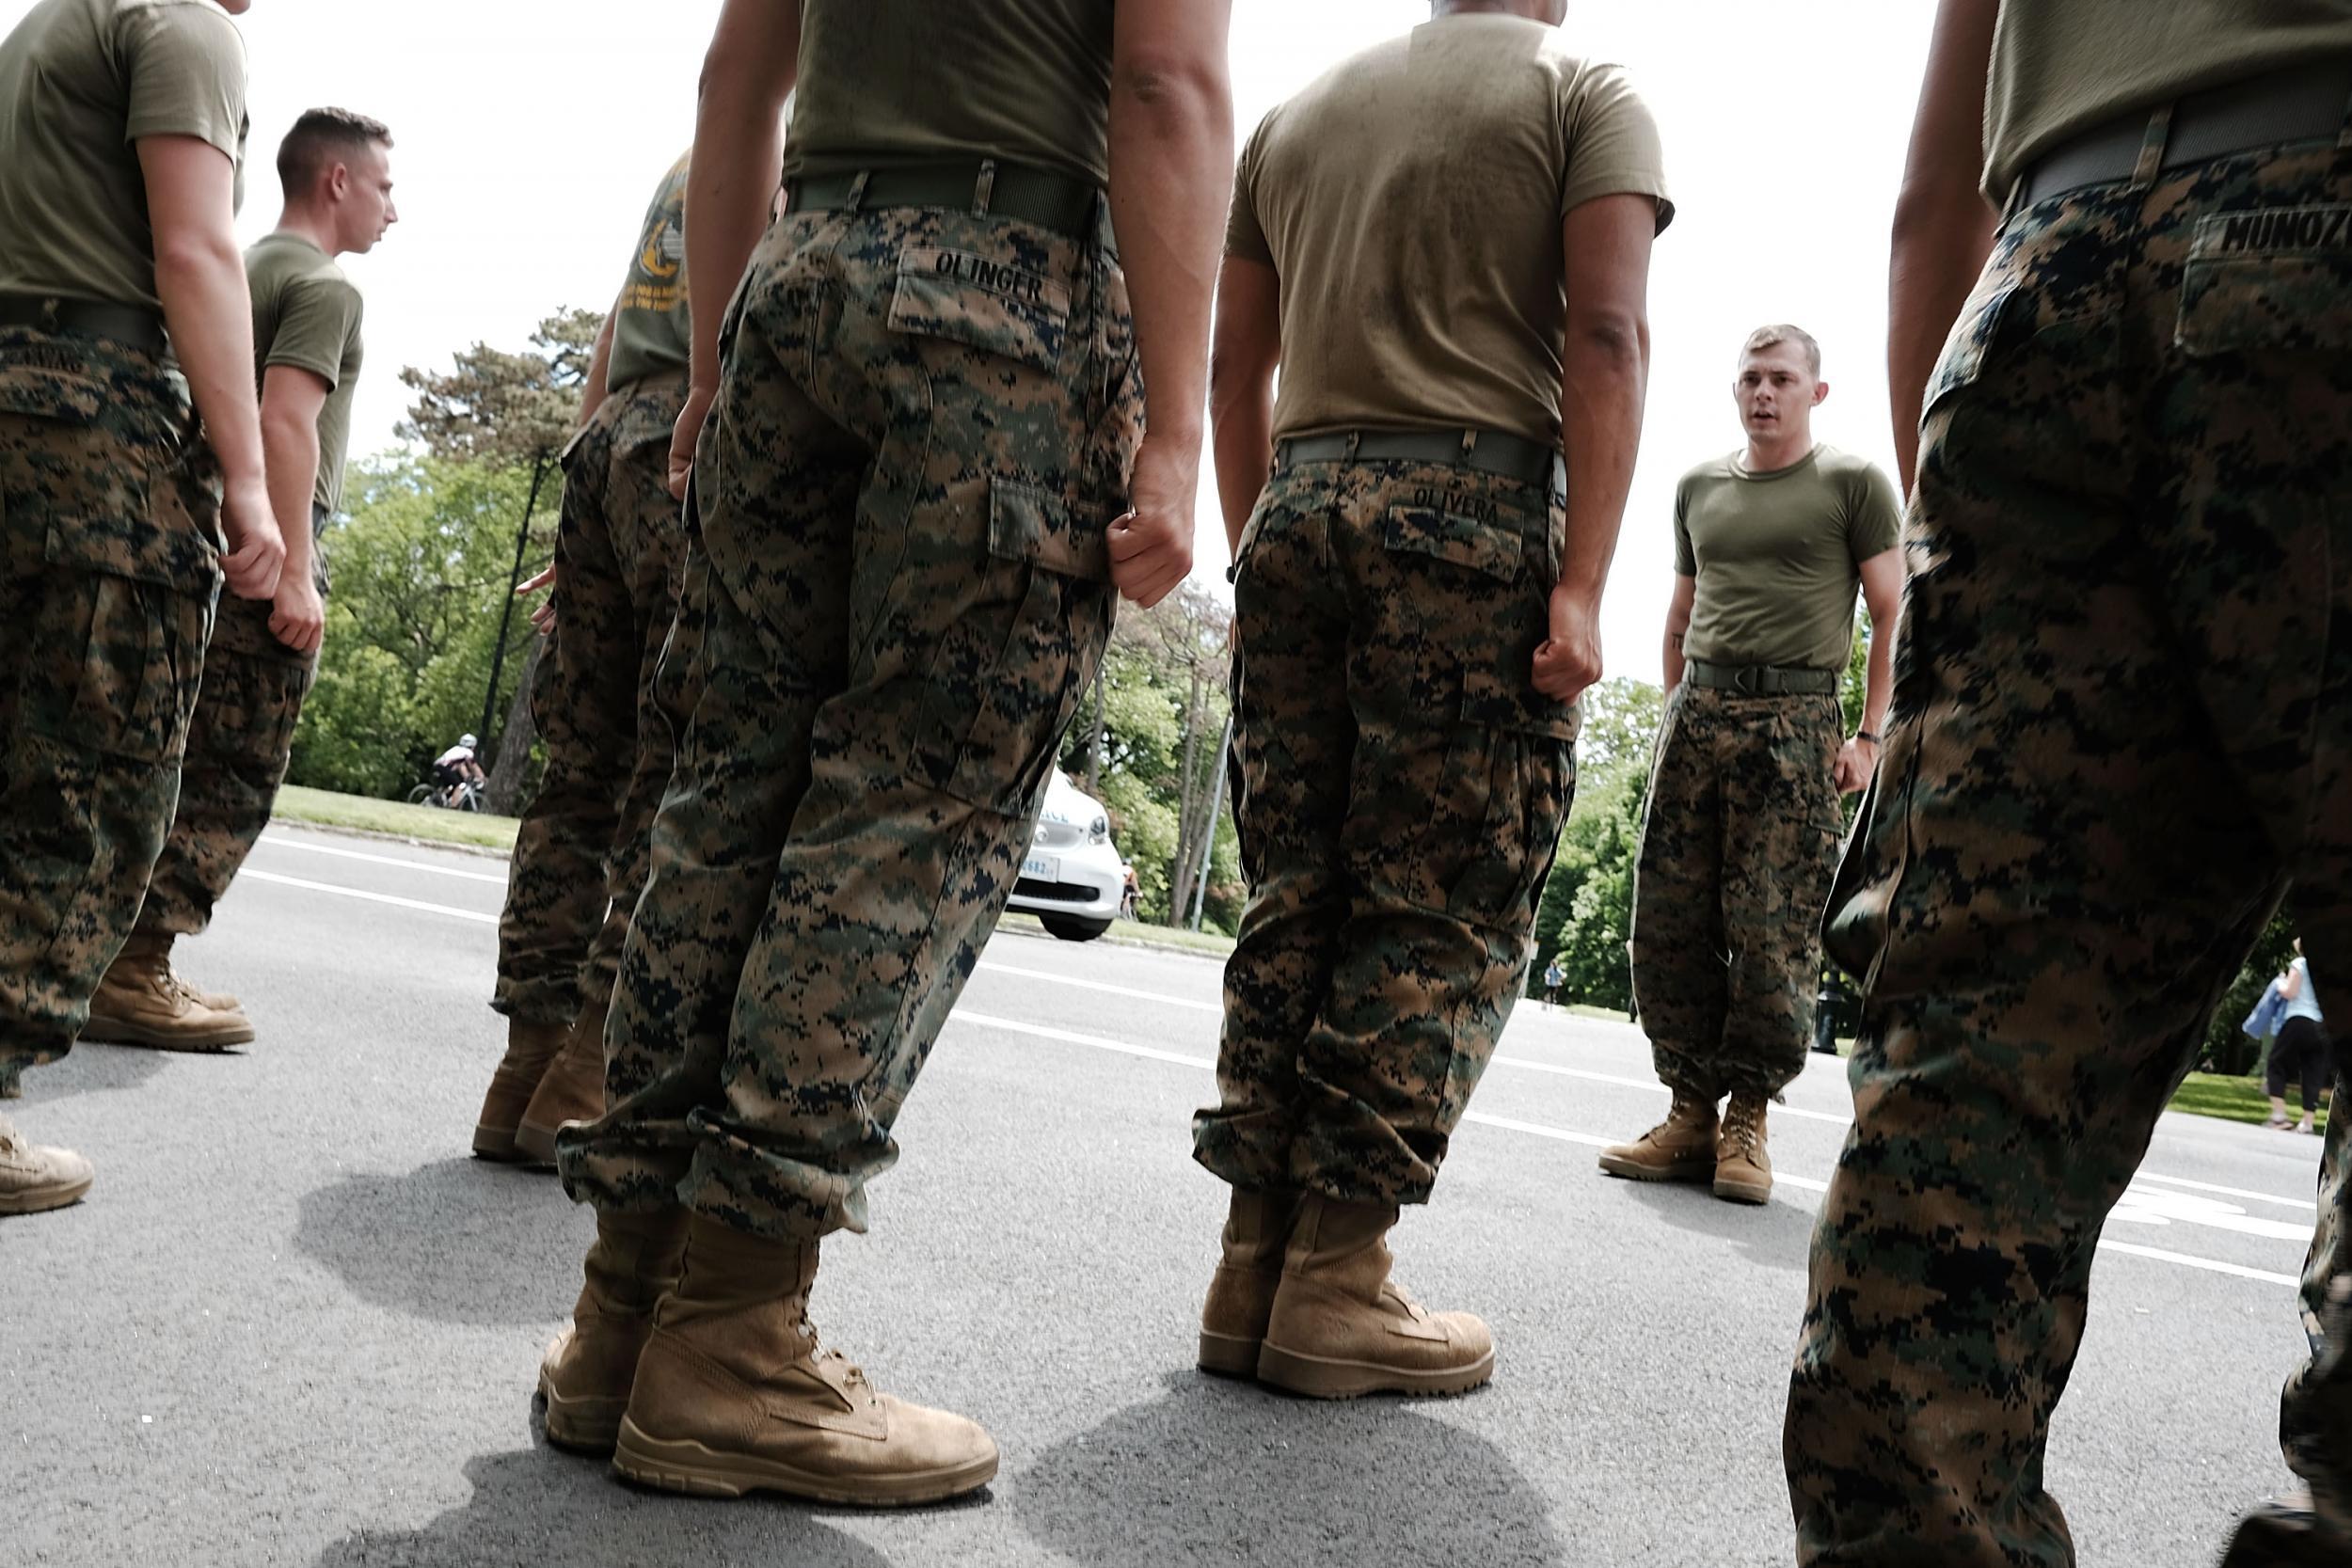 Members of the US Marine Corps (USMC) return from a run in Brooklyn's Prospect Park